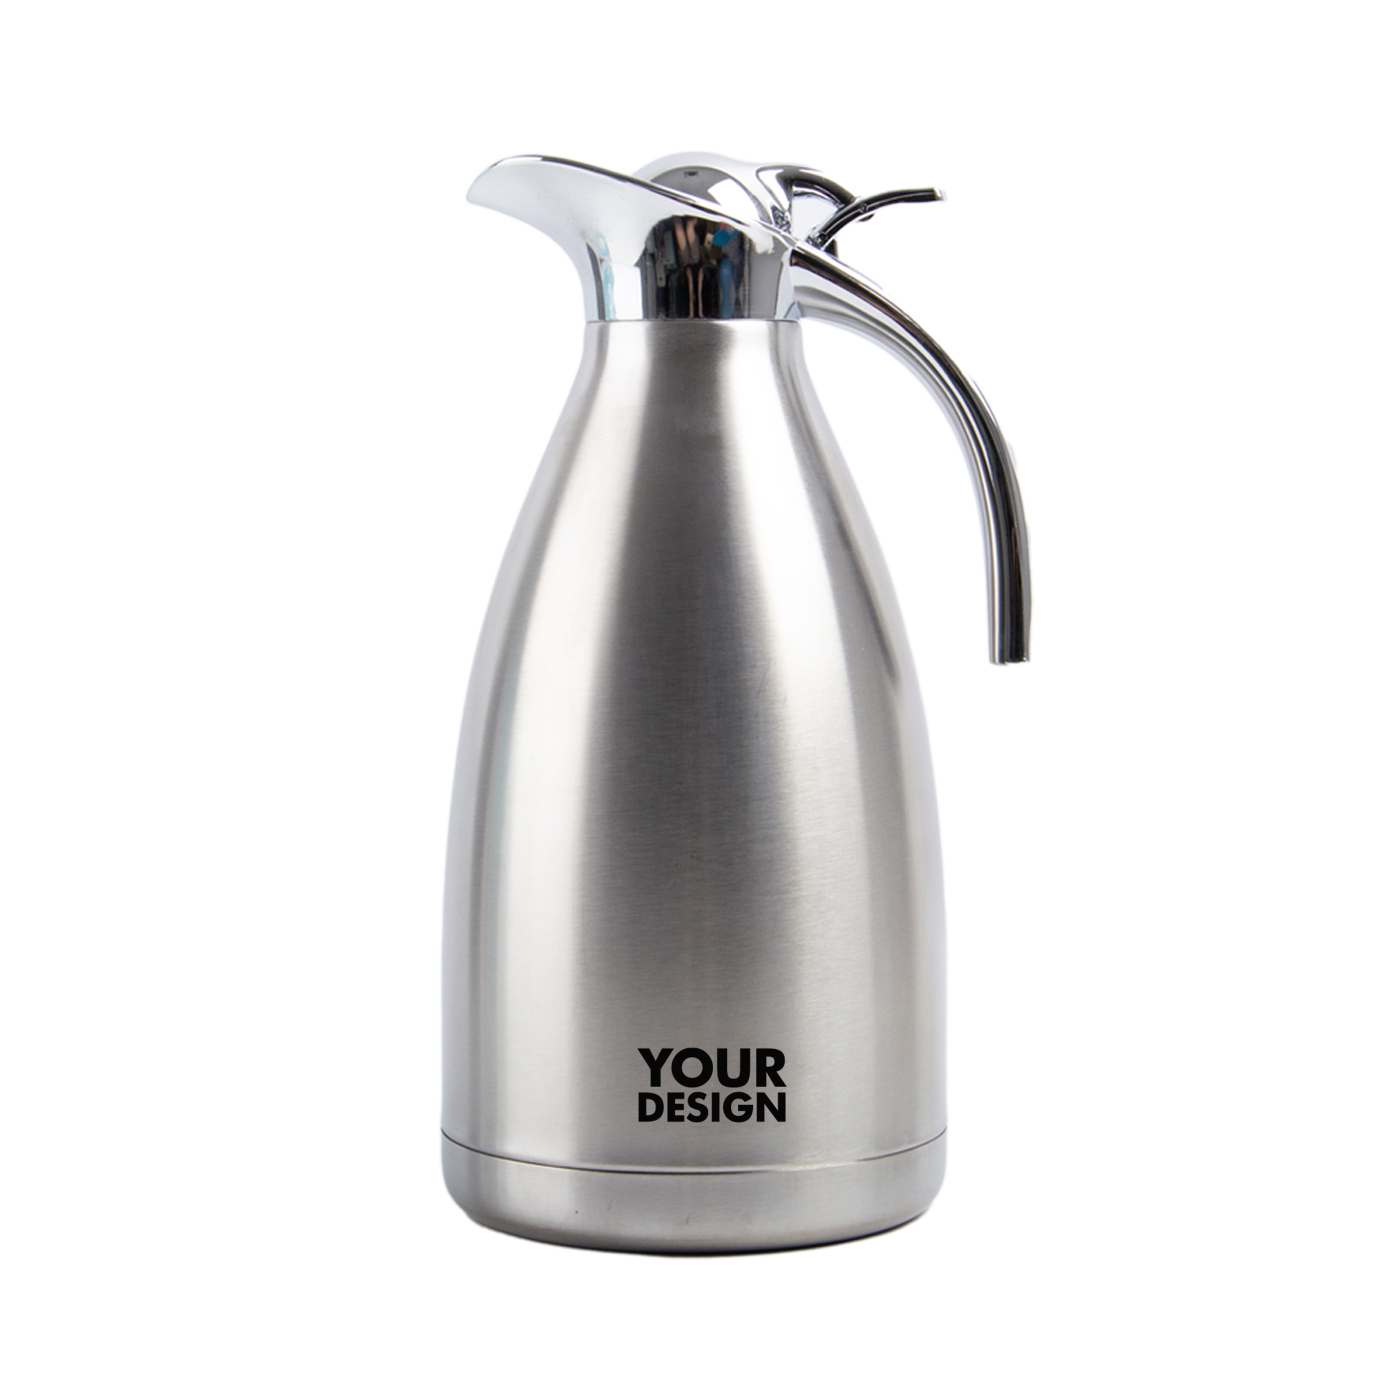 Stainless Steel Thermal Coffee Carafe1